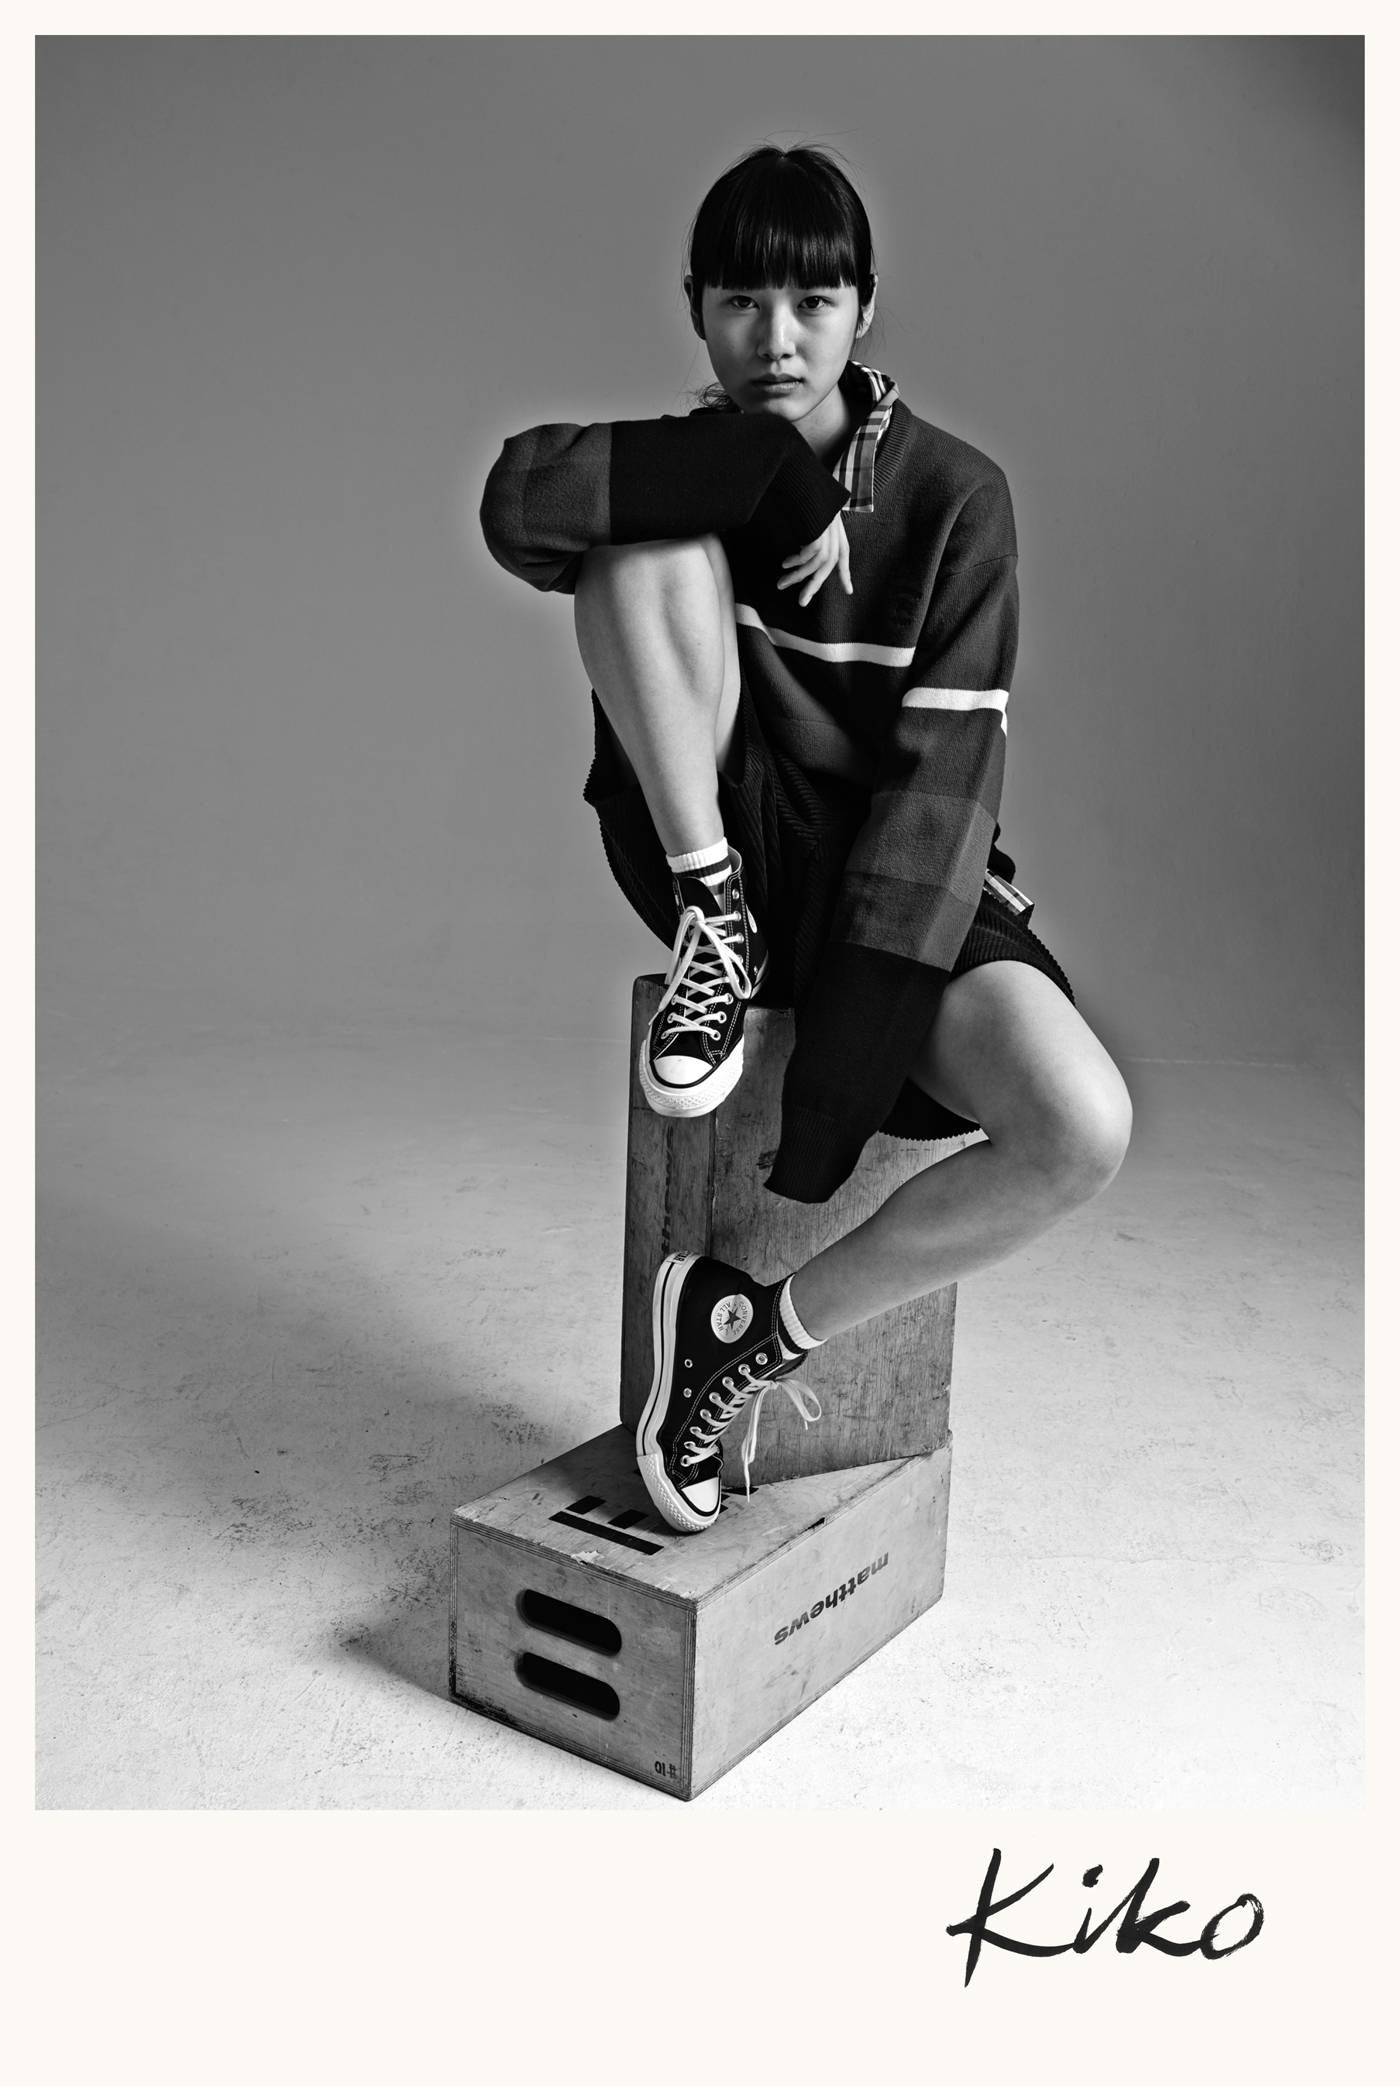 Kiko Arai at Muse Management wears sweater and shirt by Burberry. Shorts and sneakers, model's own. Socks by Topshop.